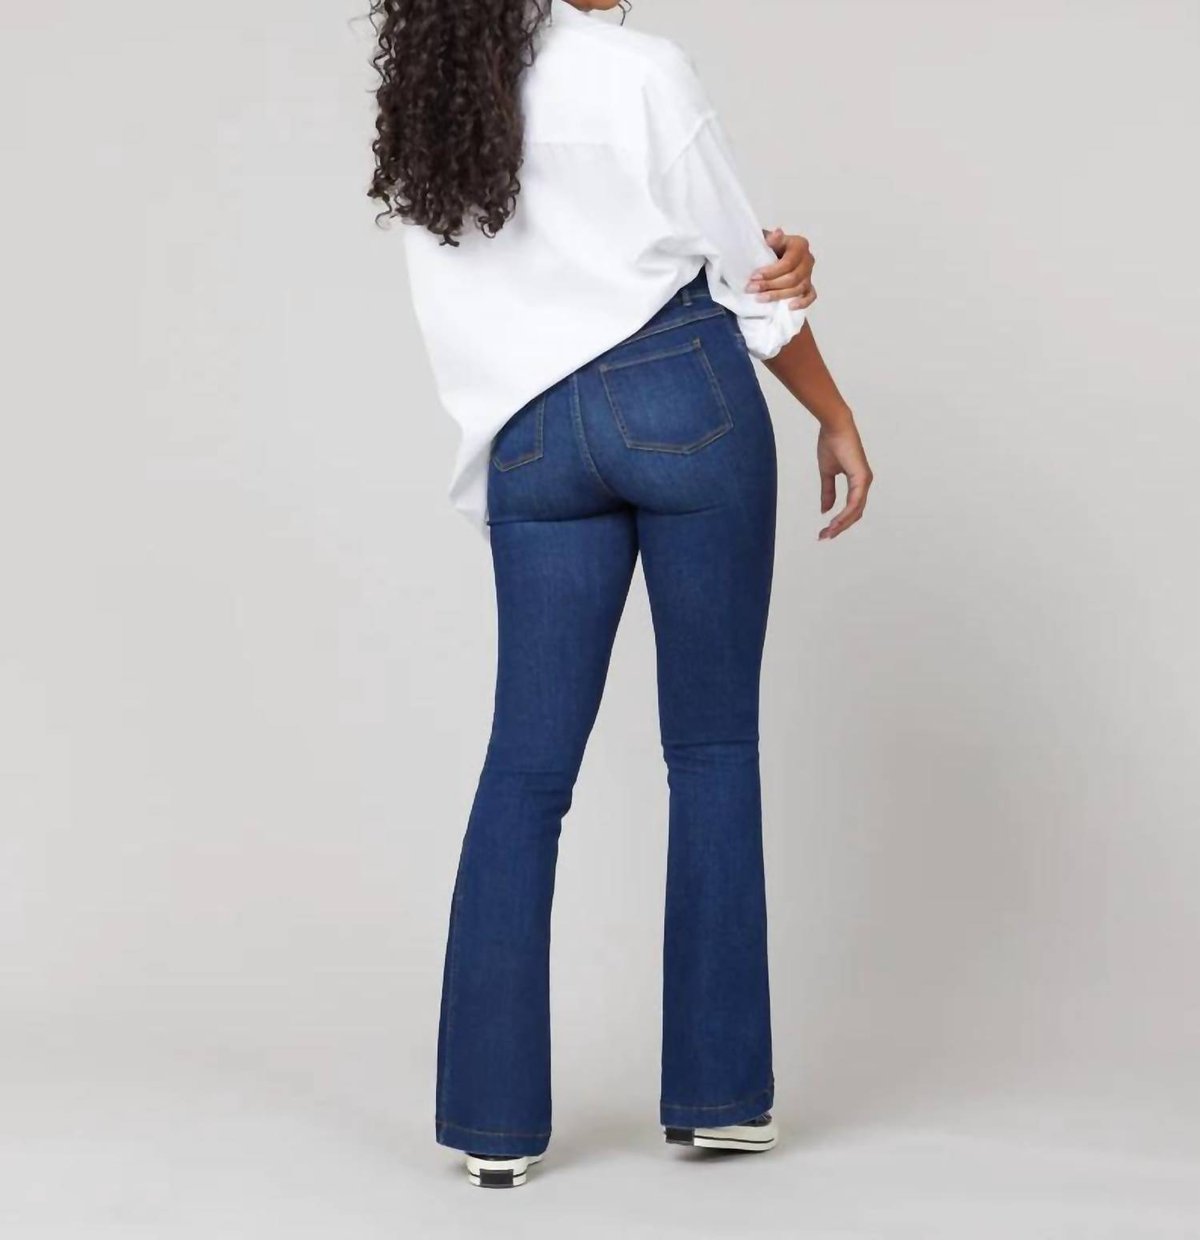 Petite Spanx Flare Jeans in Midnight Shade